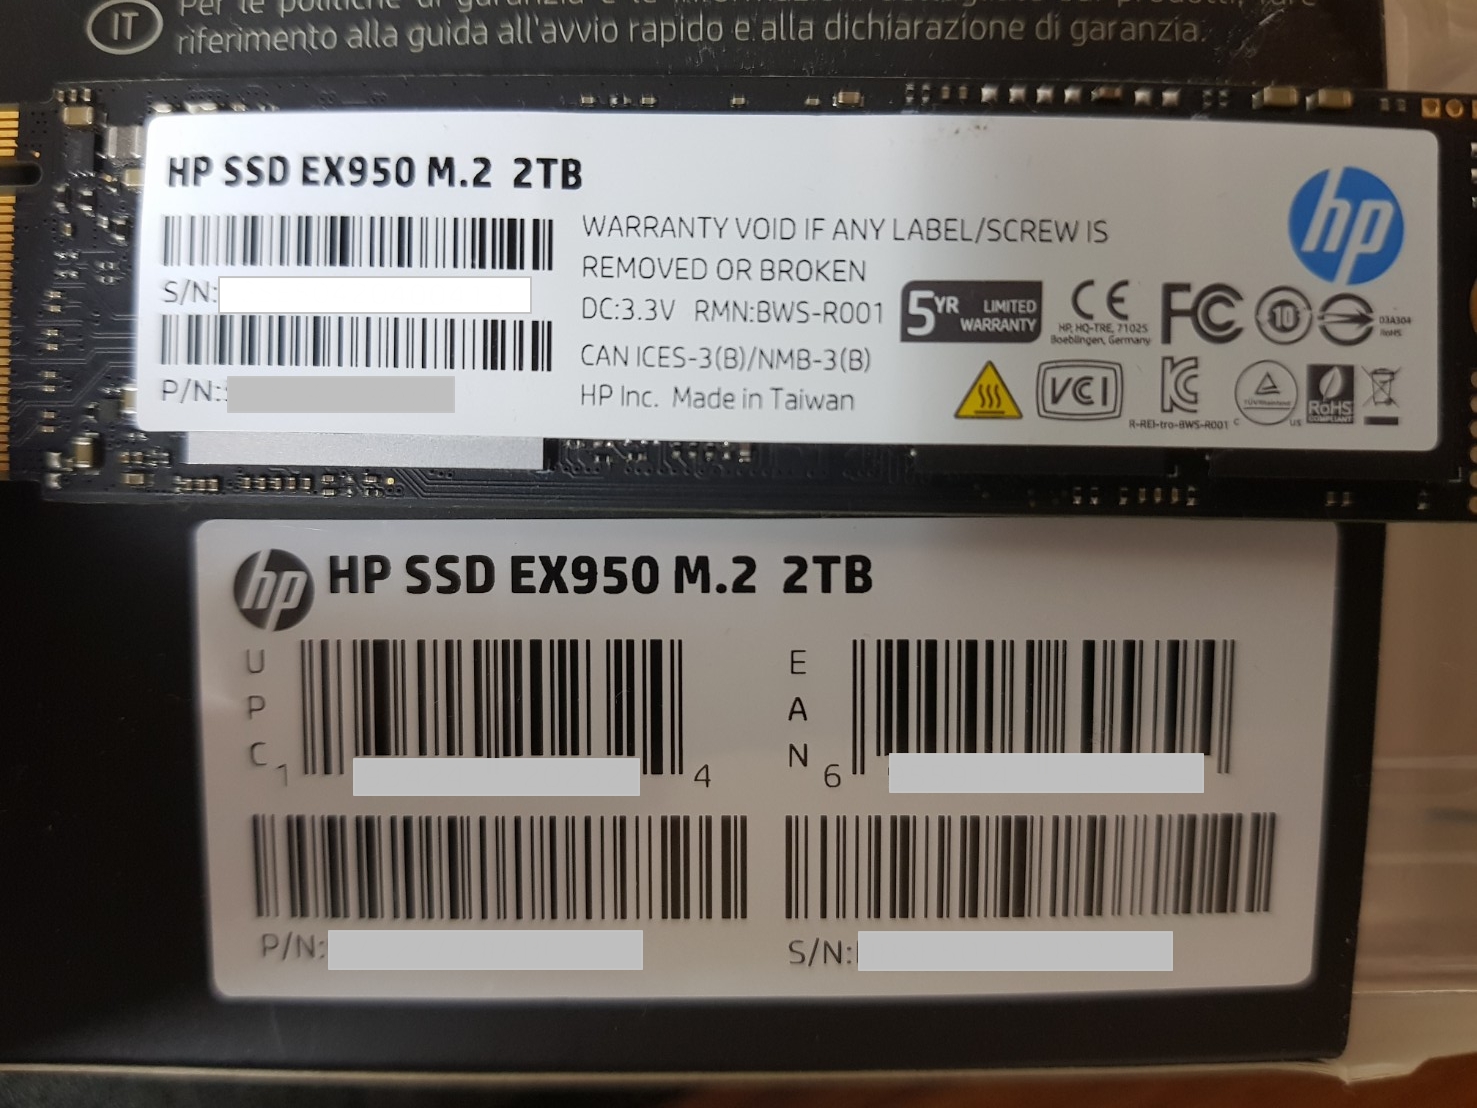 HP EX950 M.2 NVMe 2TB is locked - HP Support Community - 8202802